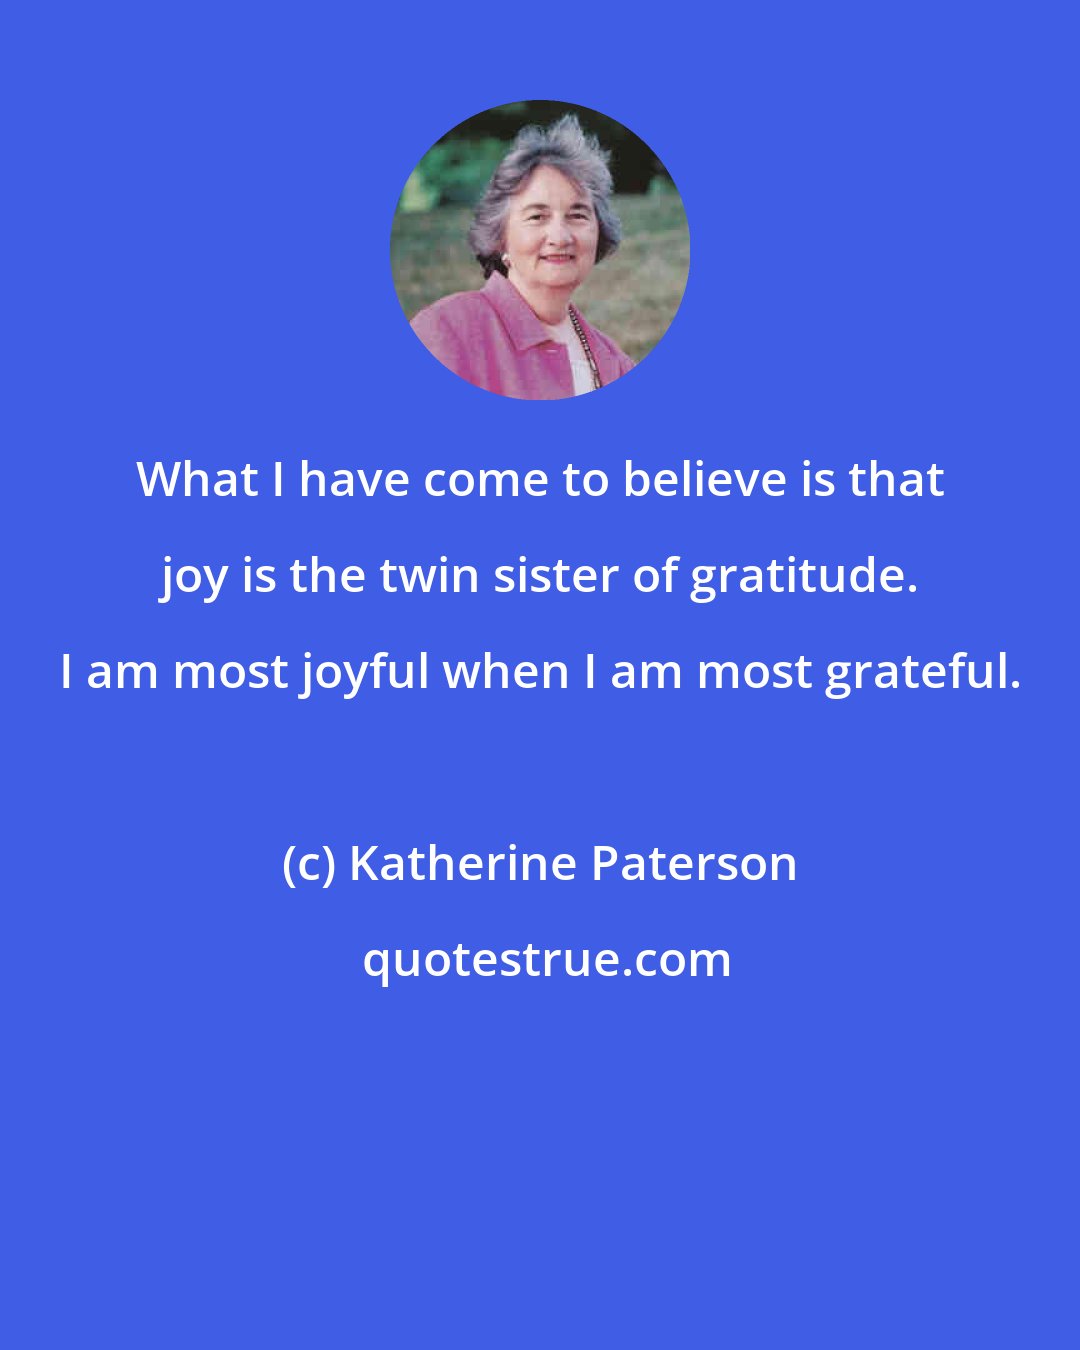 Katherine Paterson: What I have come to believe is that joy is the twin sister of gratitude. I am most joyful when I am most grateful.